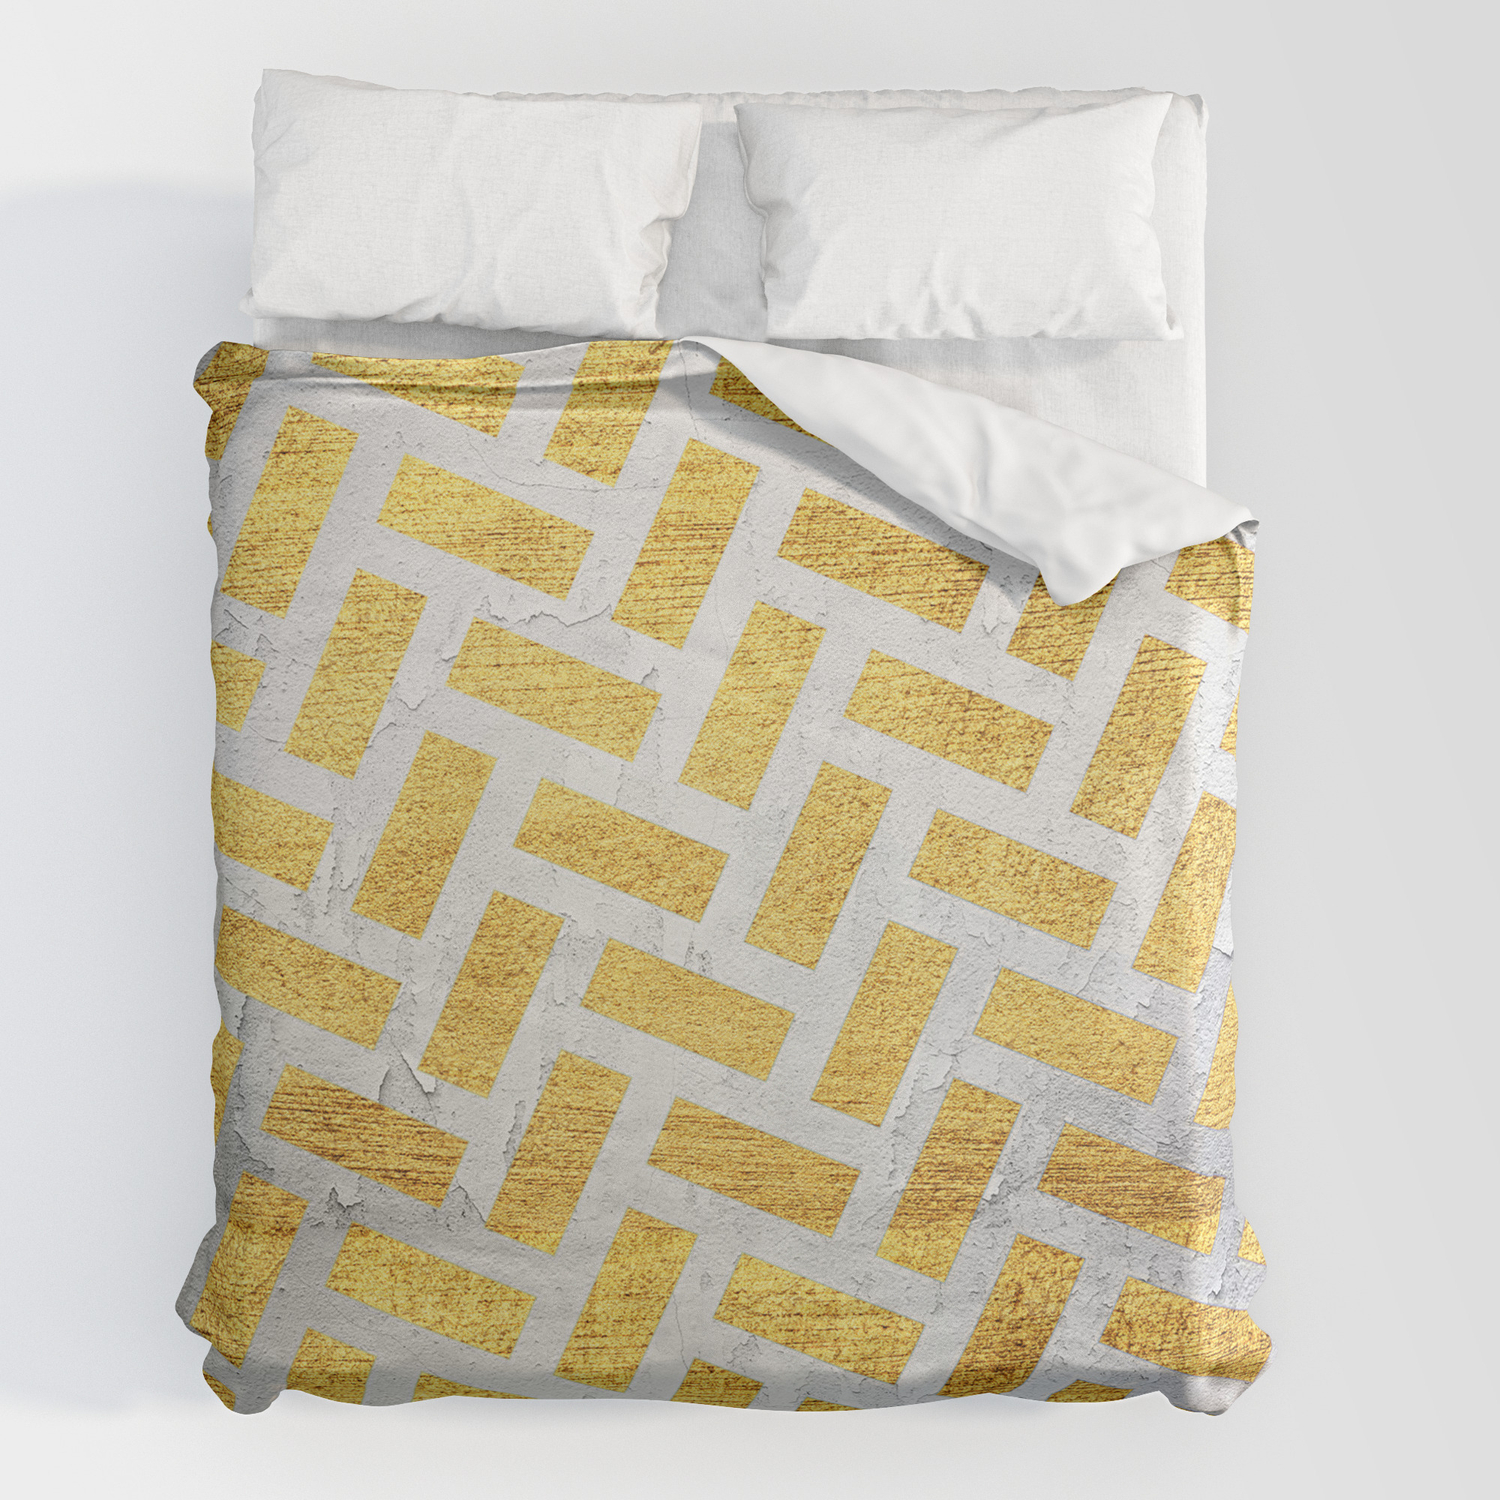 Gold And Silver Duvet Cover, Gold And Silver Duvet Cover